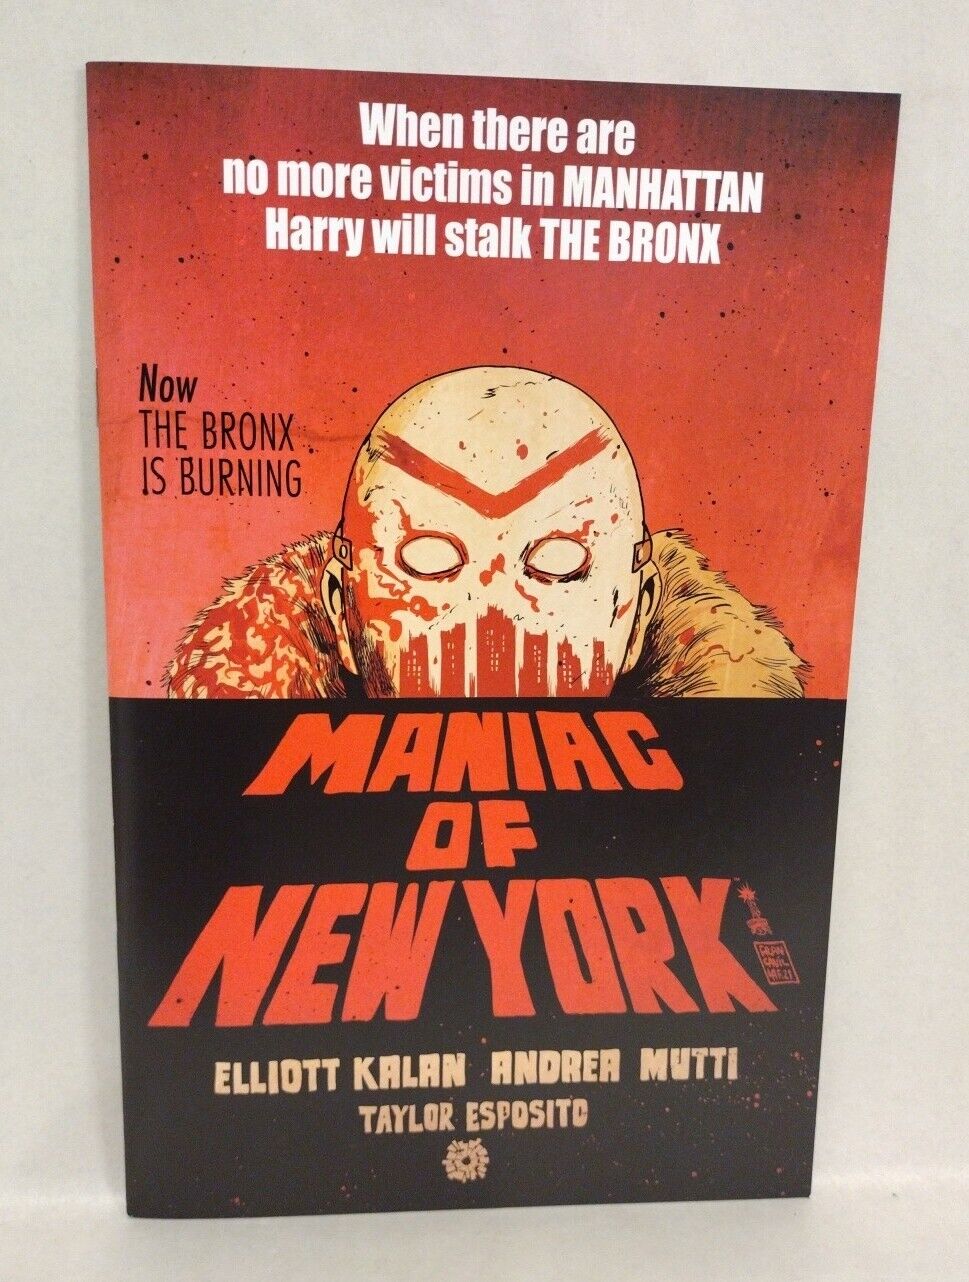 Maniac Of New York The Bronx Is Burning (2021) Aftershock Comic Lot Set #1 2 4